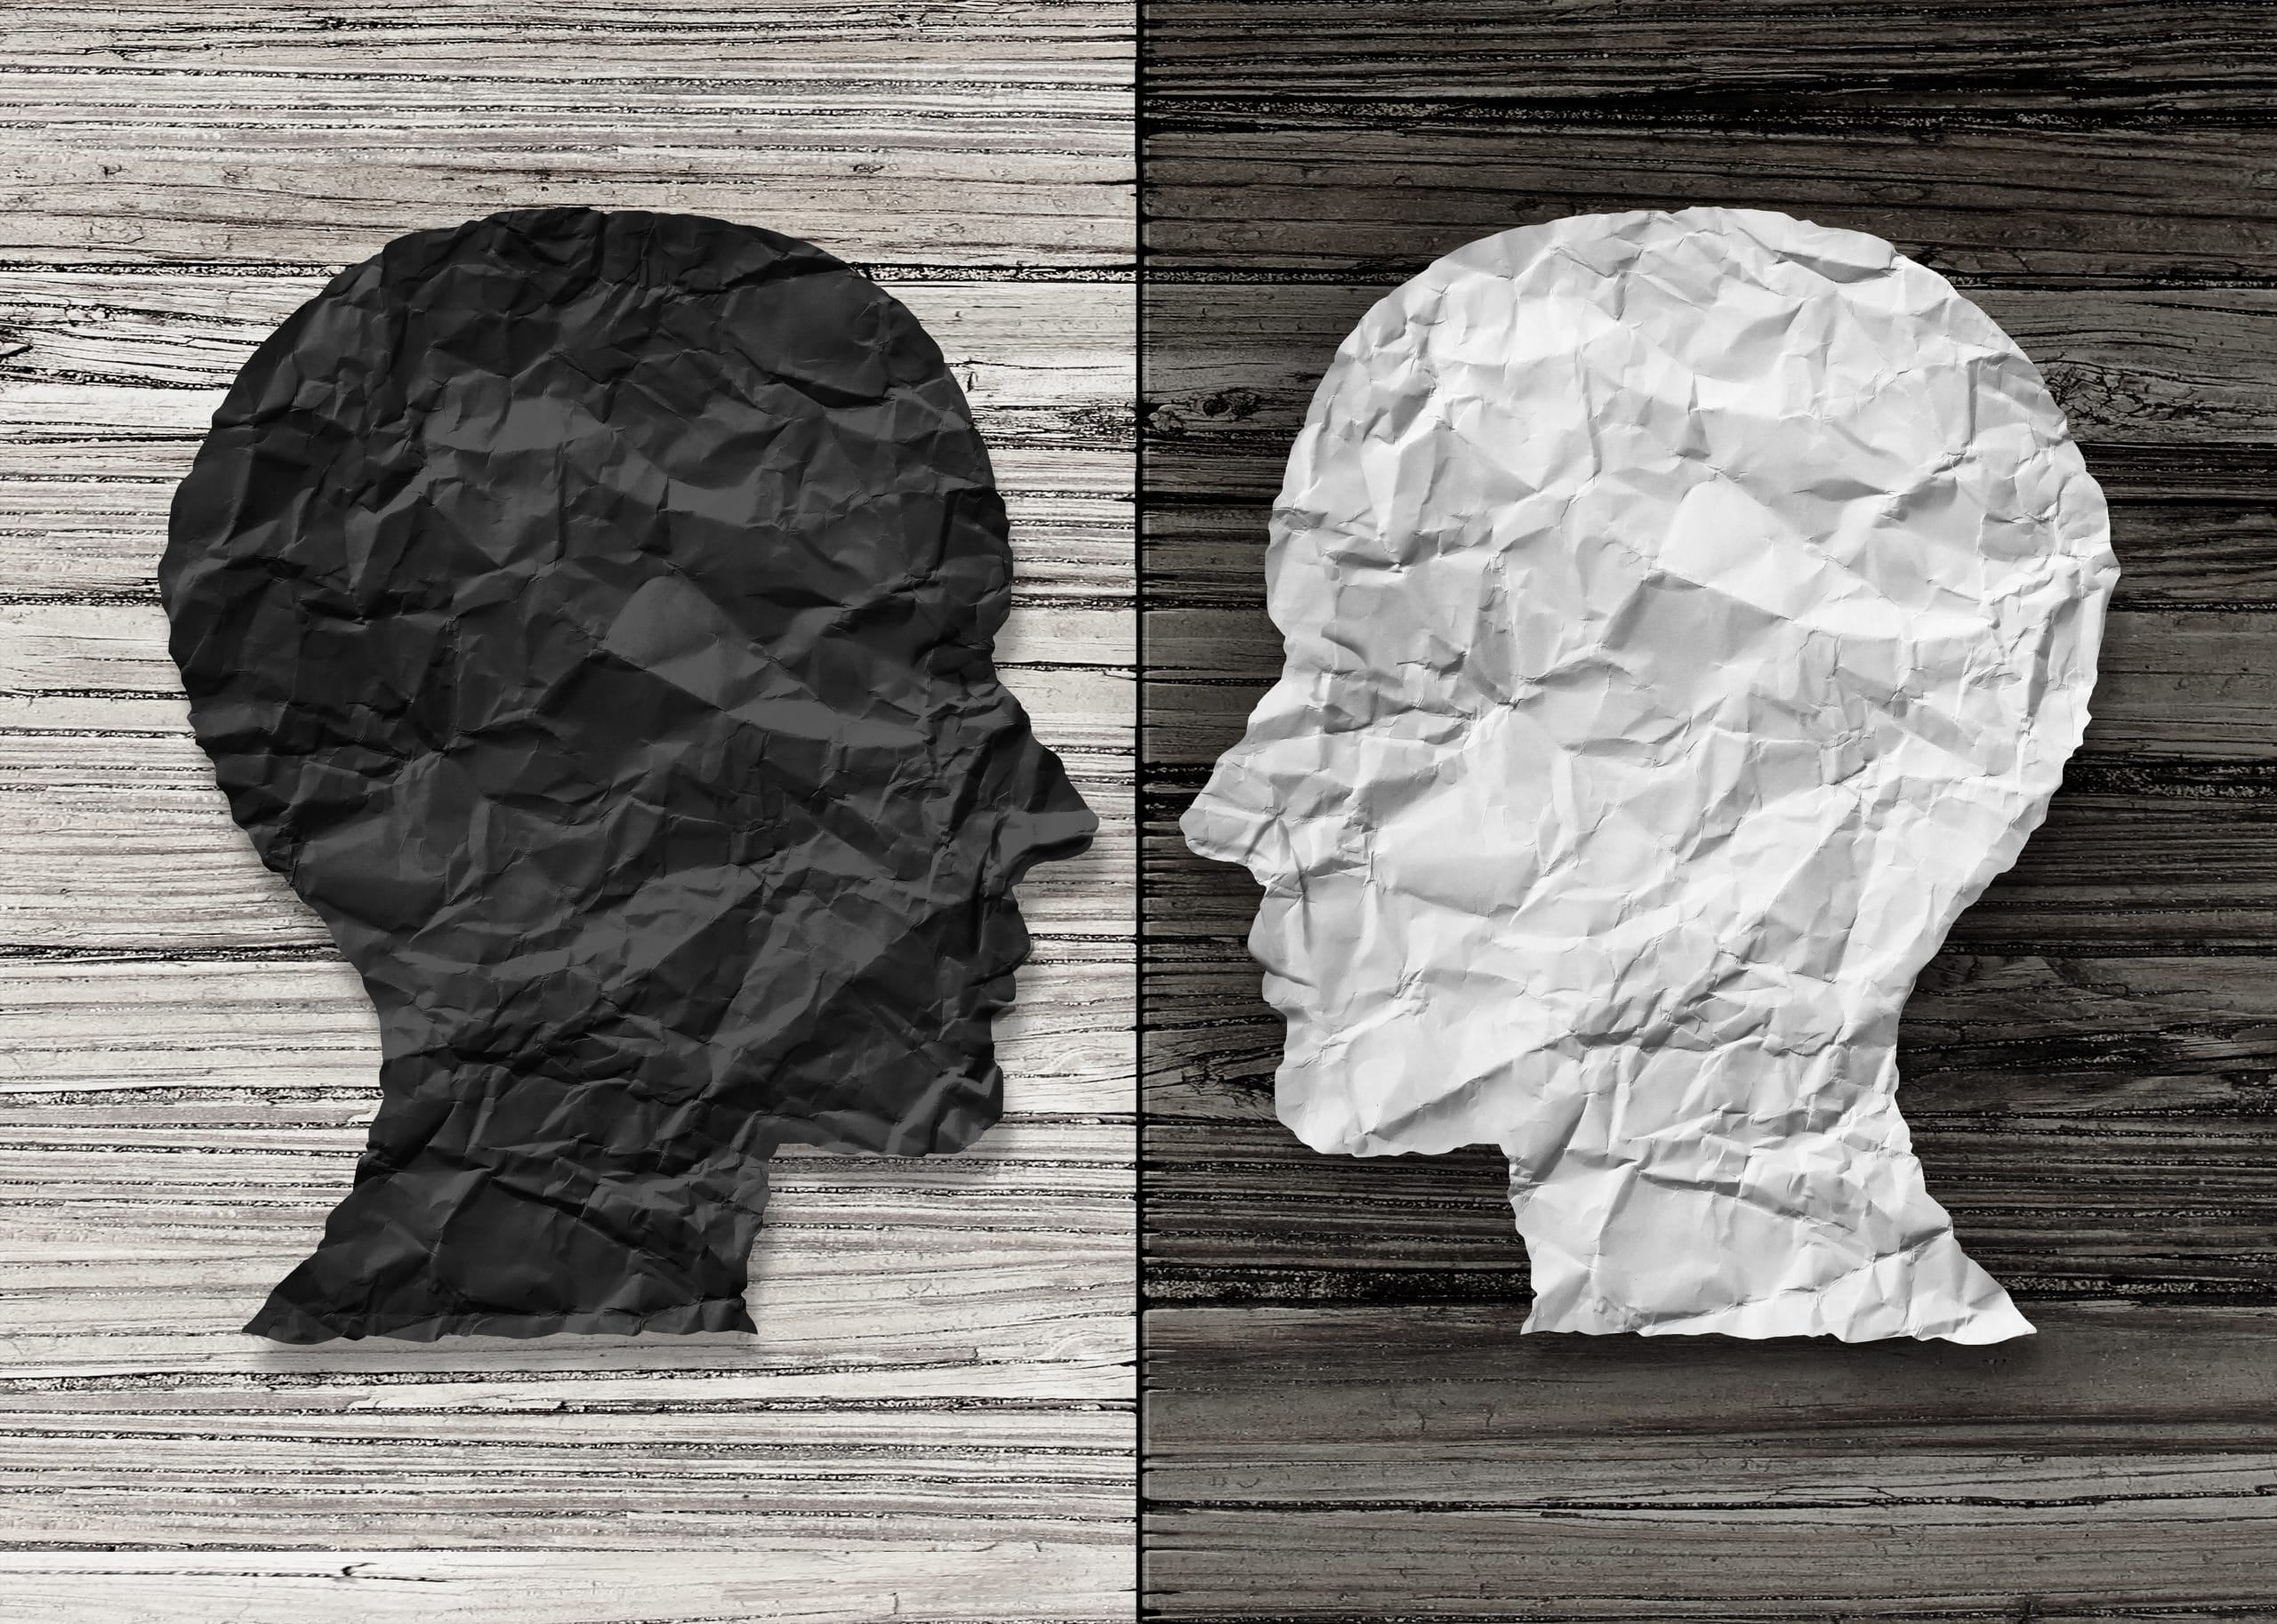 Bipolar Disorder: two faces in black, grey and white to highlight mental health